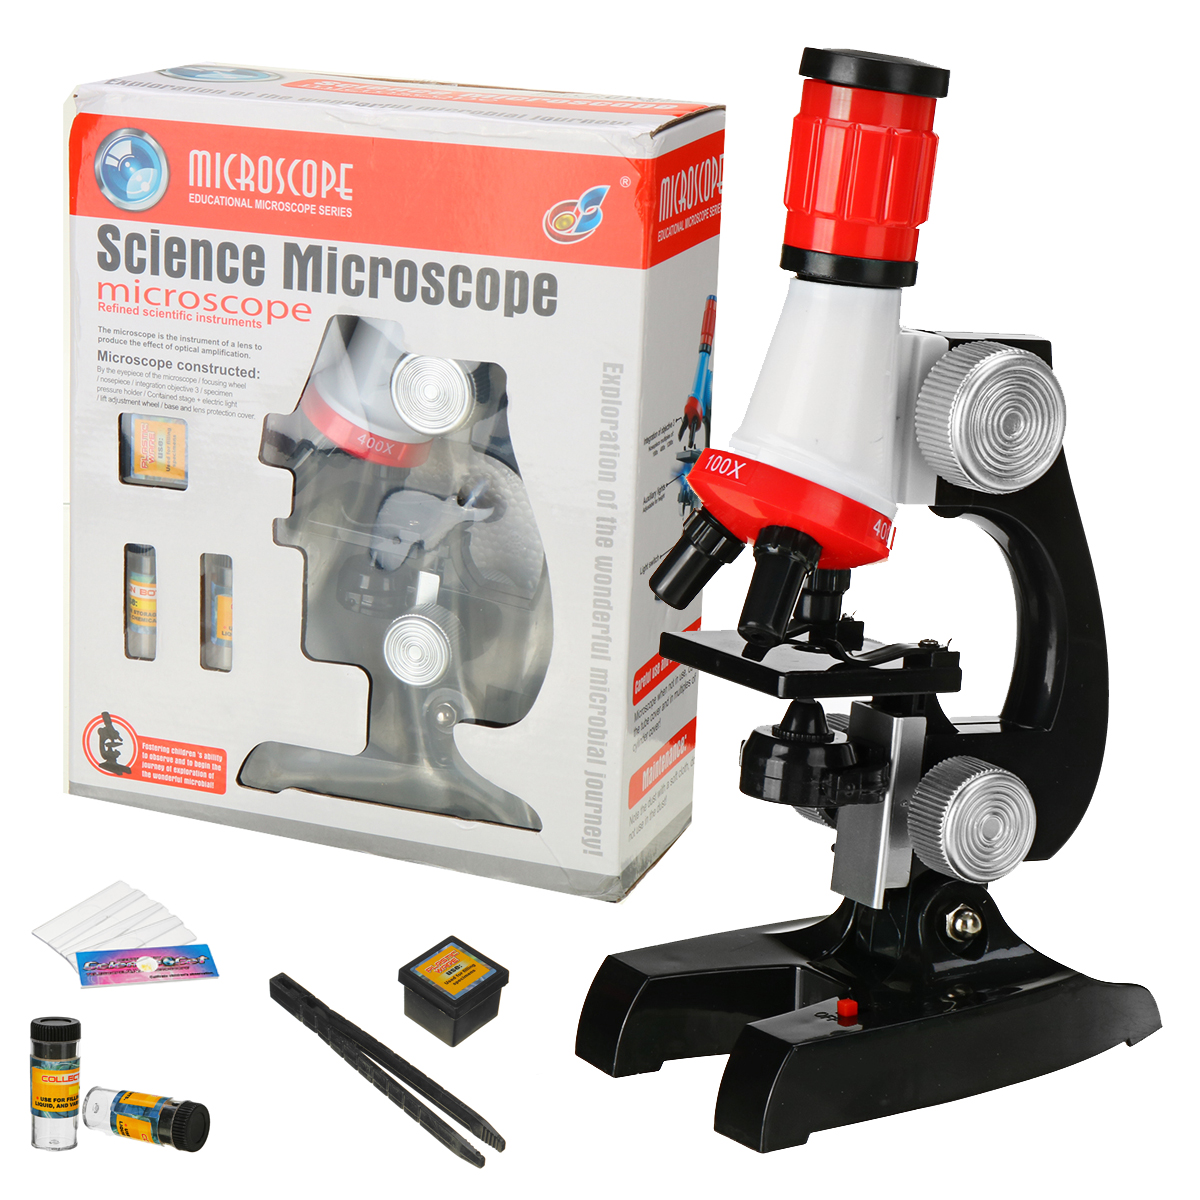 Children-Biological-Microscope-Kit-Lab-LED-100X-400X-1200X-Home-School-Science-Educational-Toy-Gift--1903472-19